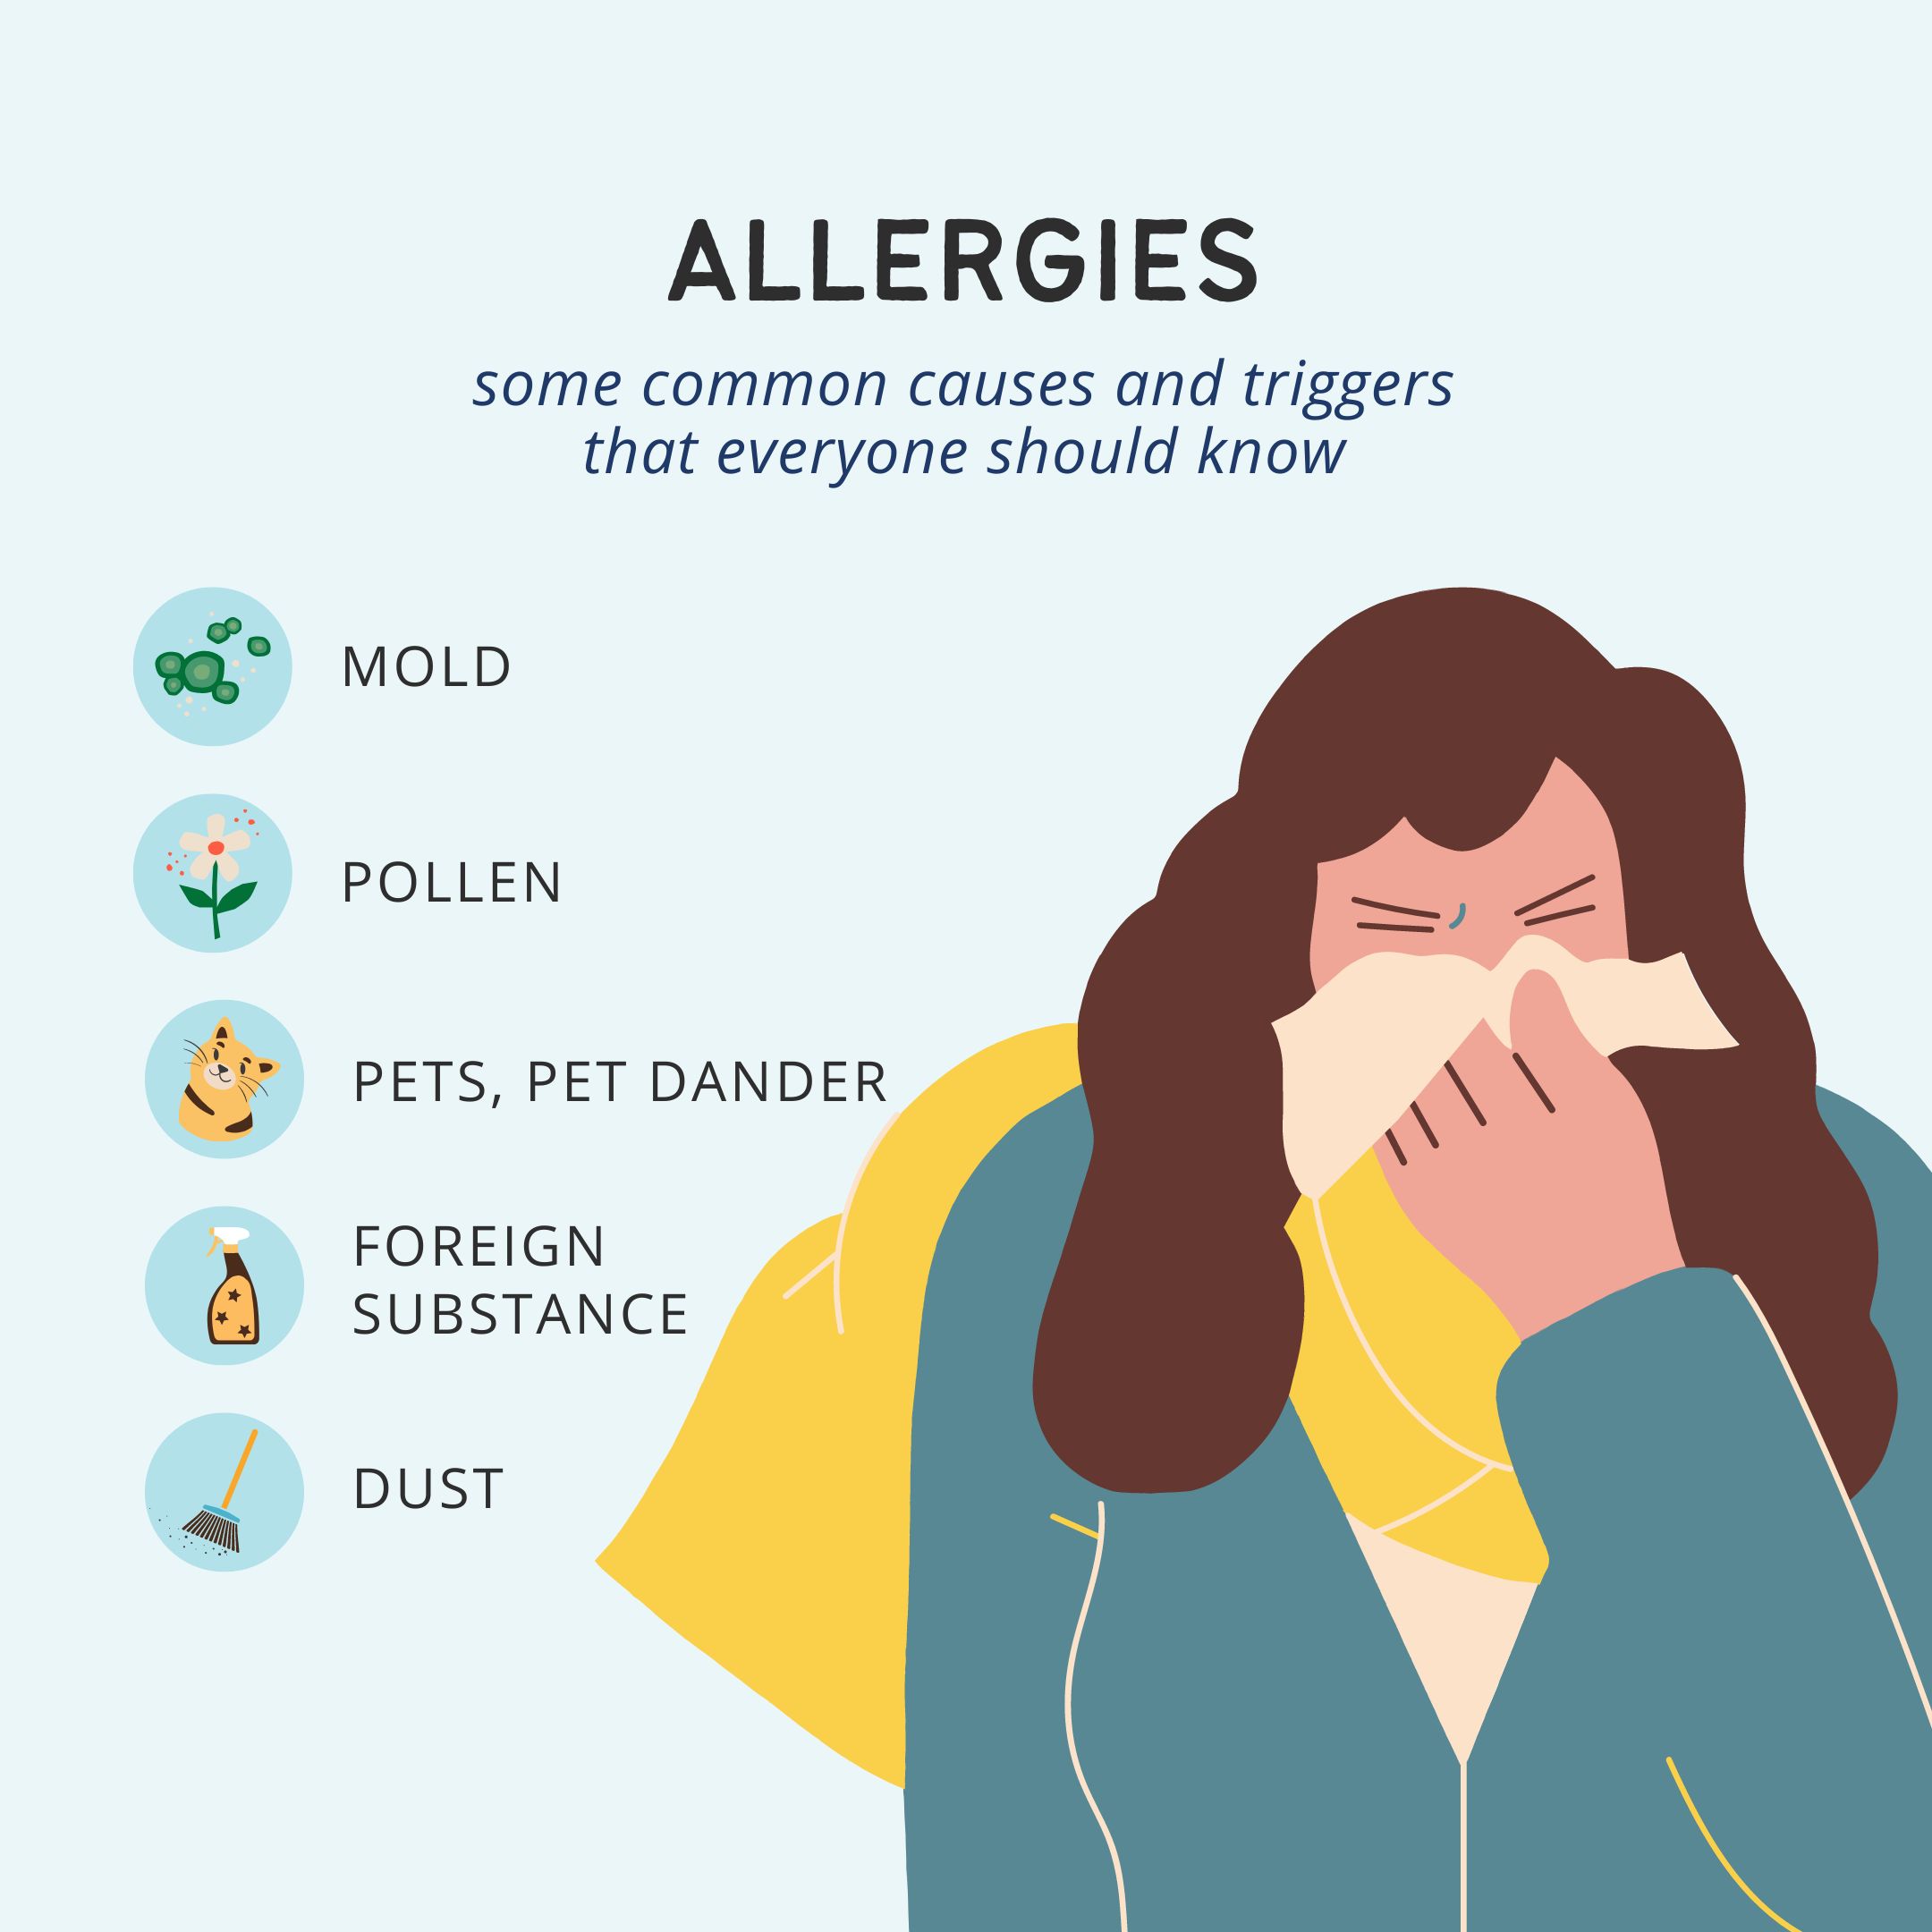 The symptoms and causes of Allergies